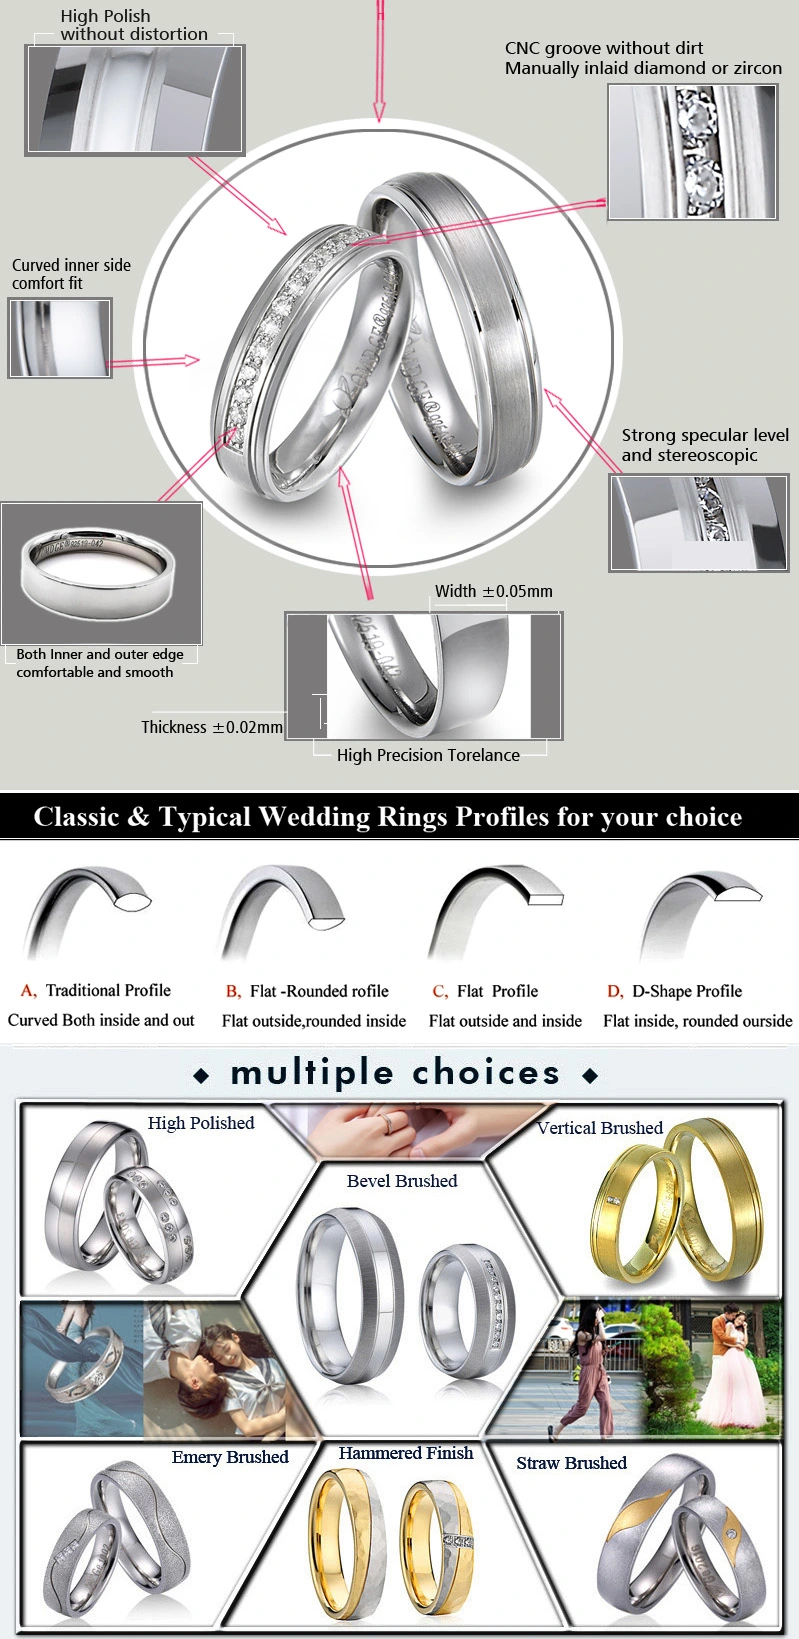 Wholesale Fashion Accessories Replica Jewelry Stainless Steel Wedding Bands Couple Ring